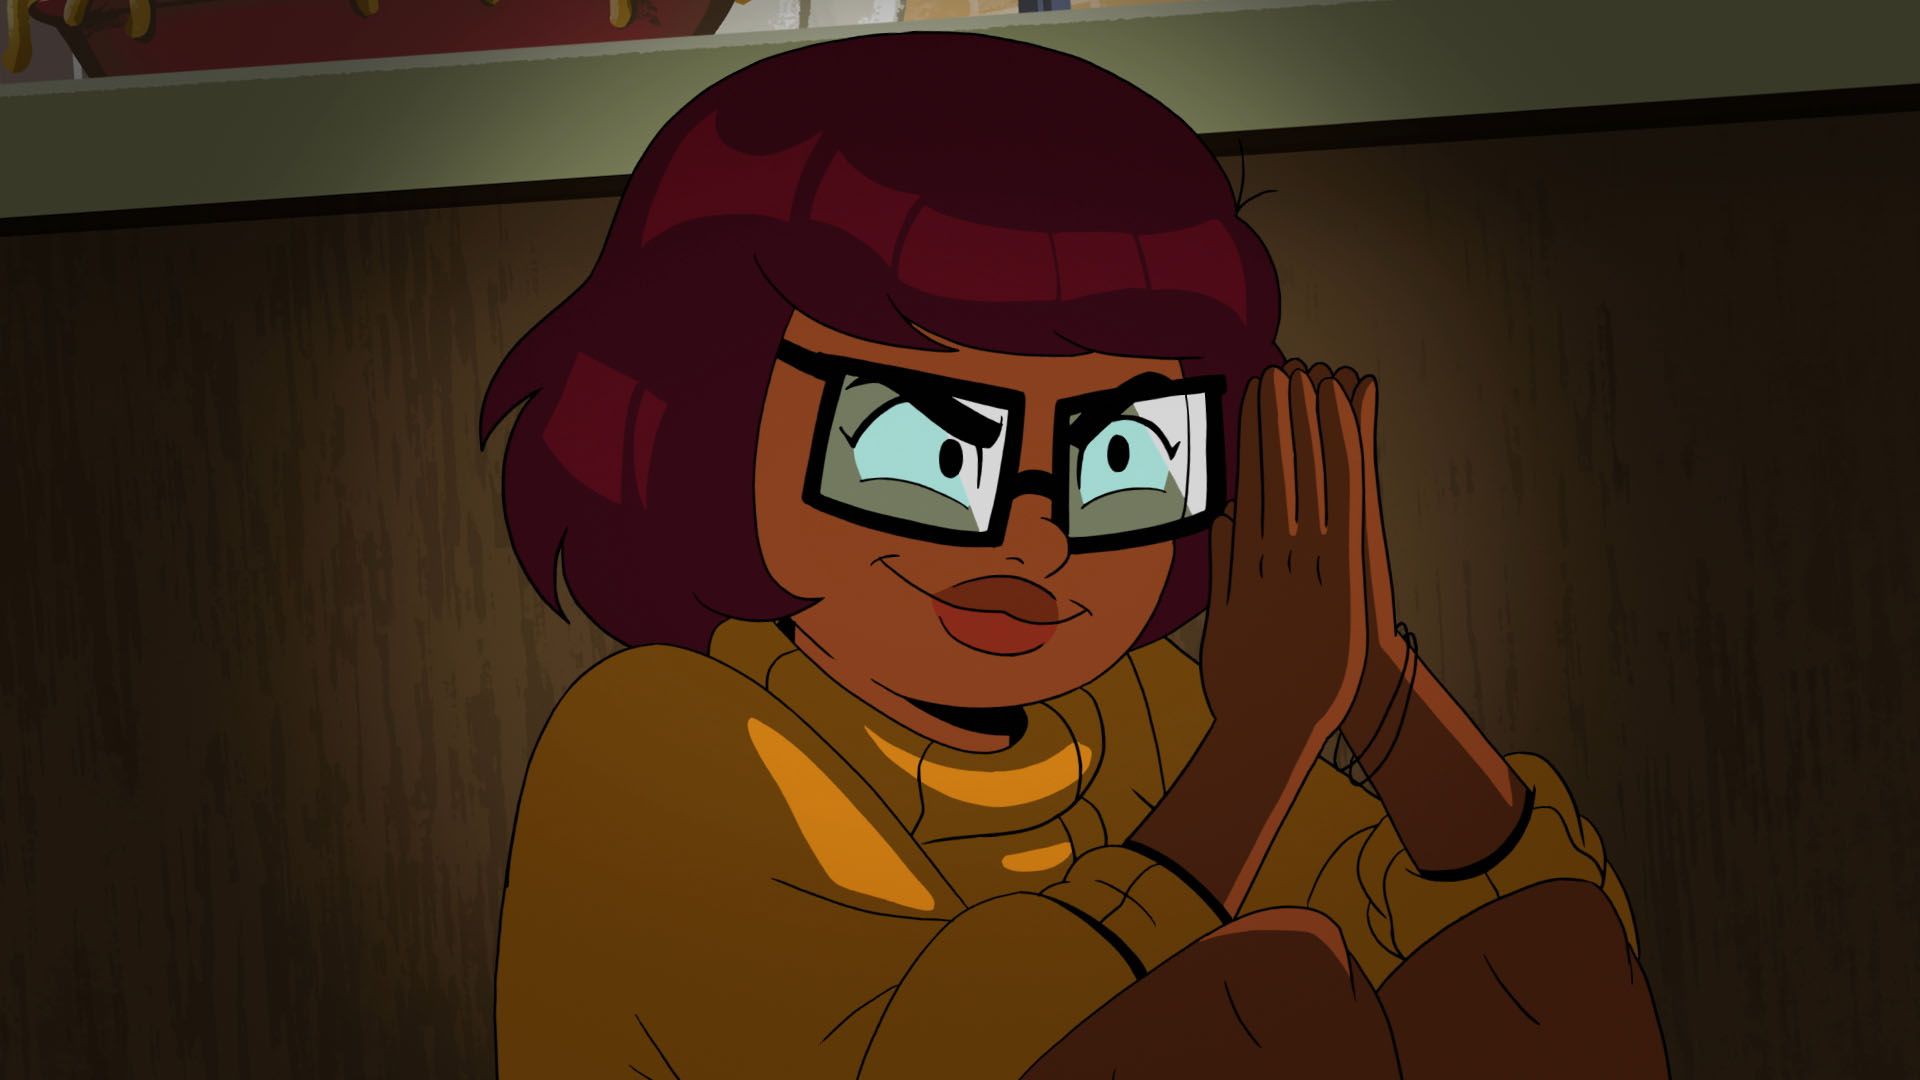 Mindy Kaling's Scooby-Doo Reboot Velma Gets HBO Max Premiere Date